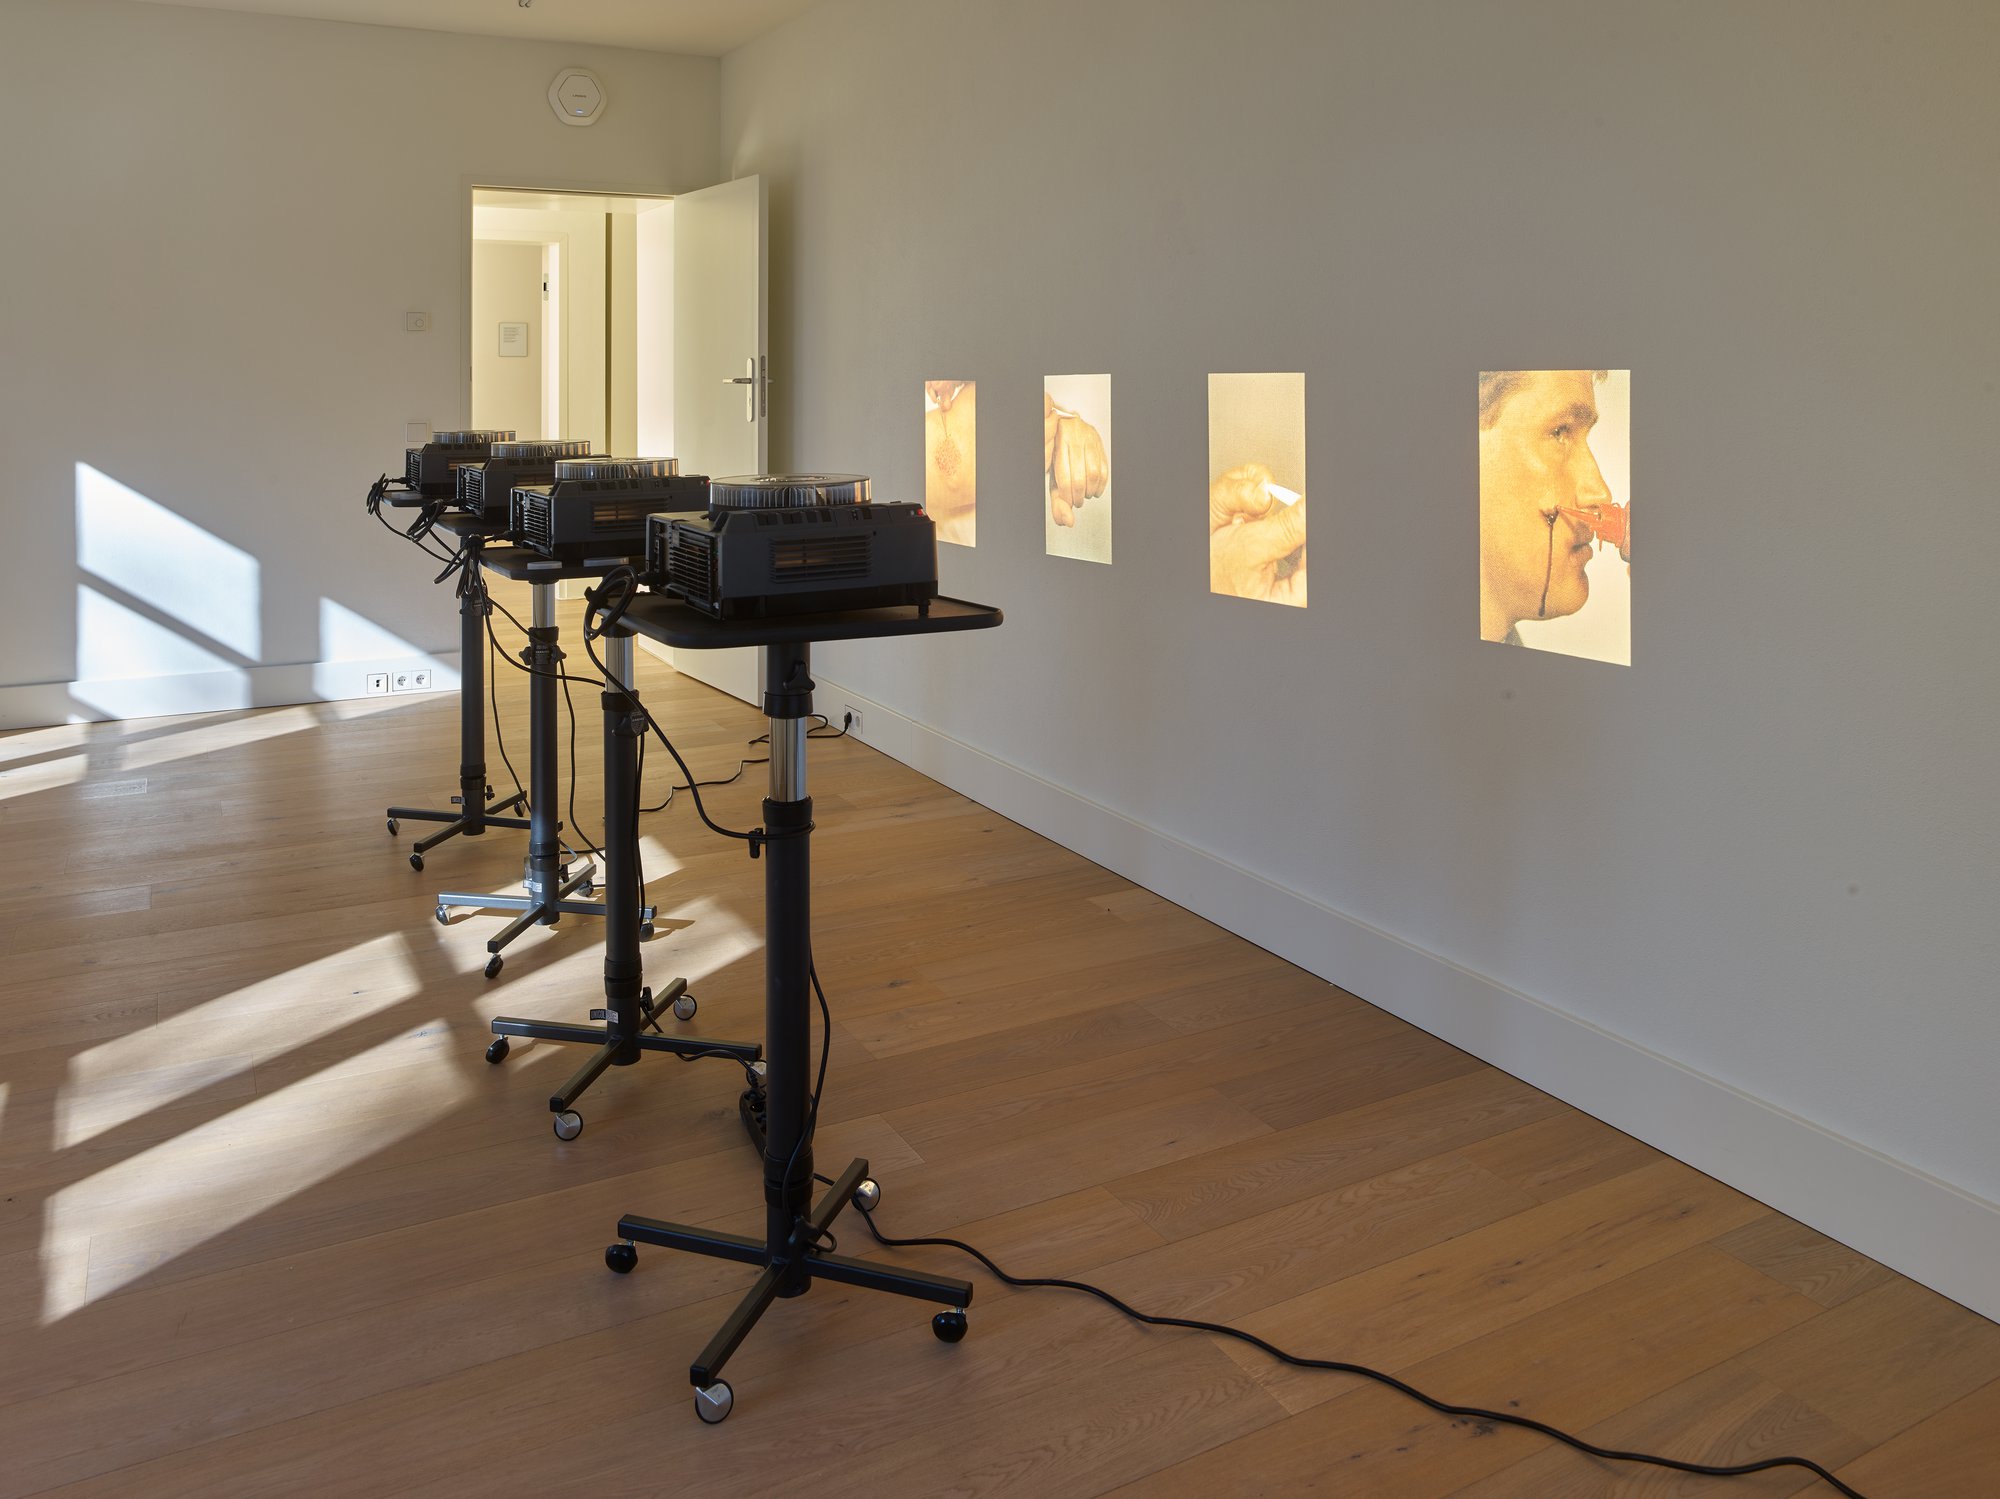 James Richards, The Screens, 35 mm slide installation, four sets of eighty DIA slides (320 slides in total), 2013. Installation view, When We Were Monsters, Haus Mödrath, Kerpen, 2021